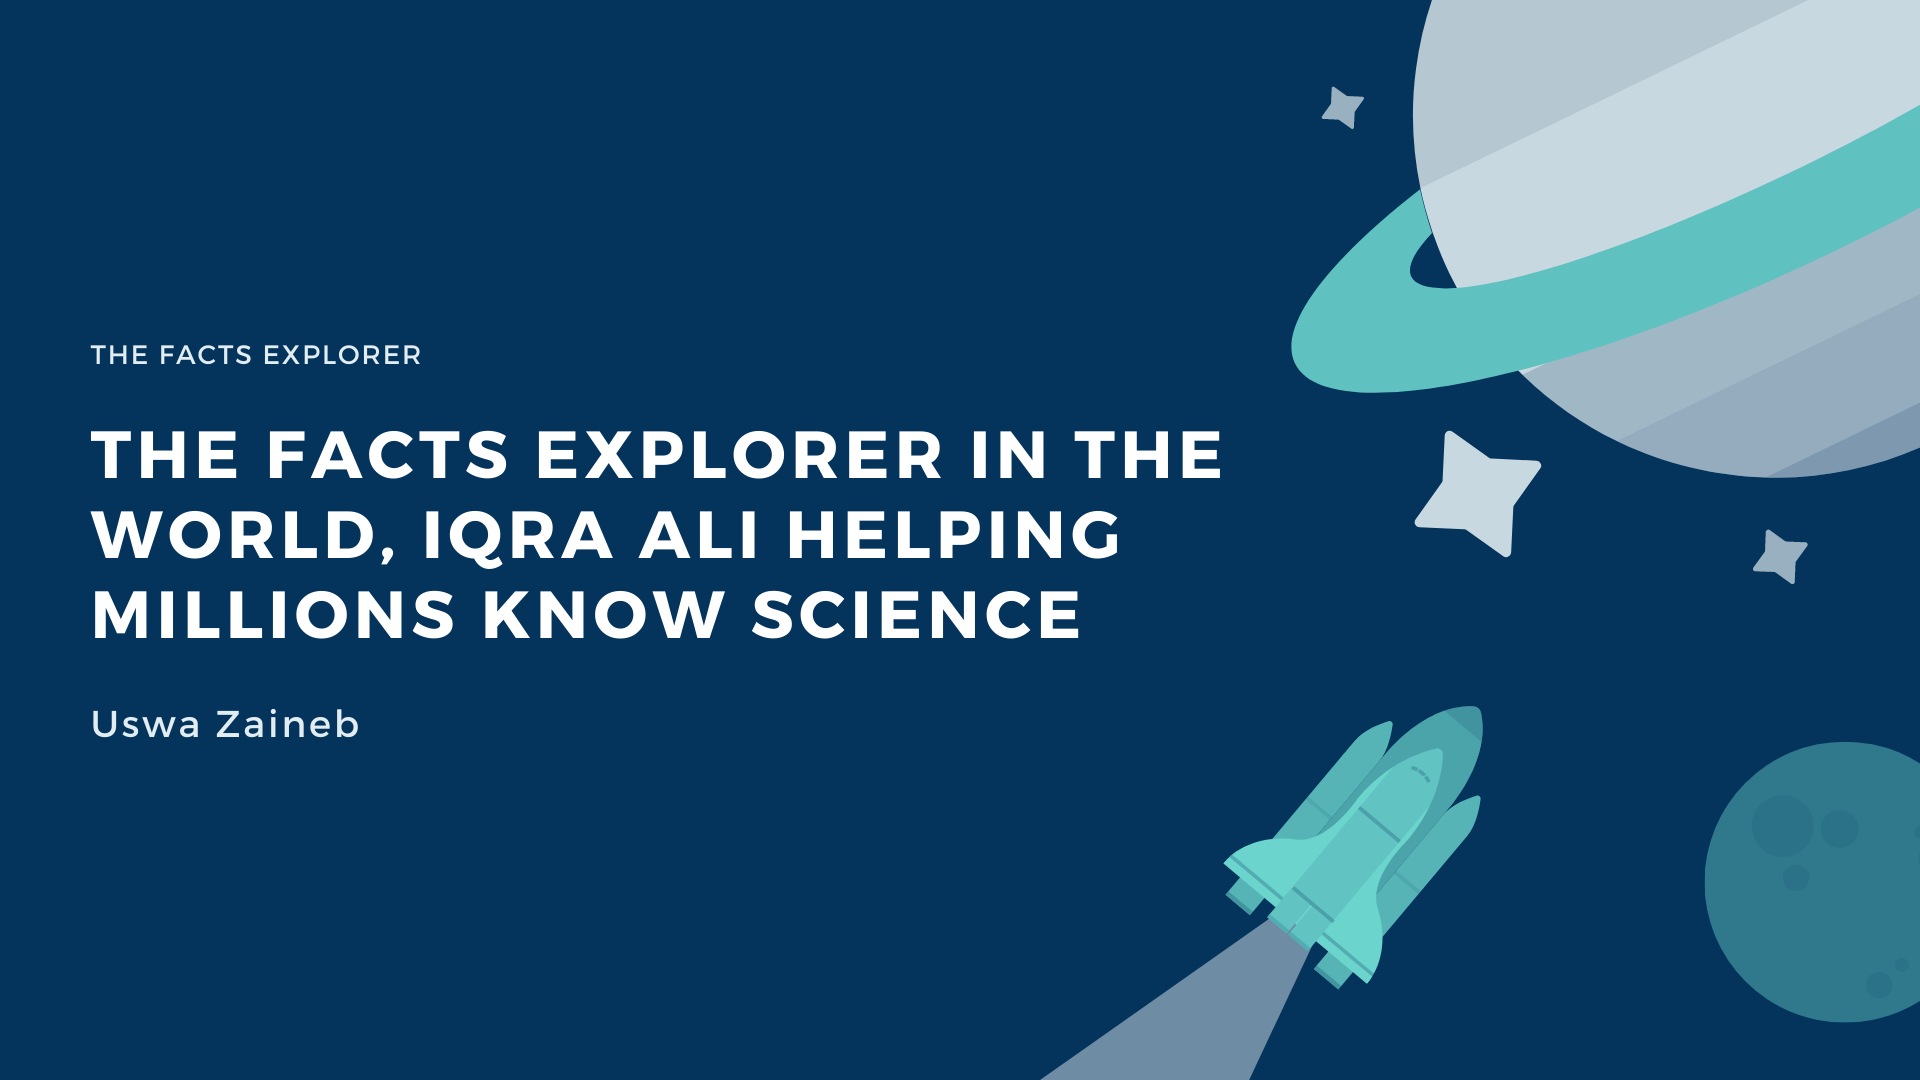 The Facts Explorer in the World, Iqra Ali Helping Millions Know Science